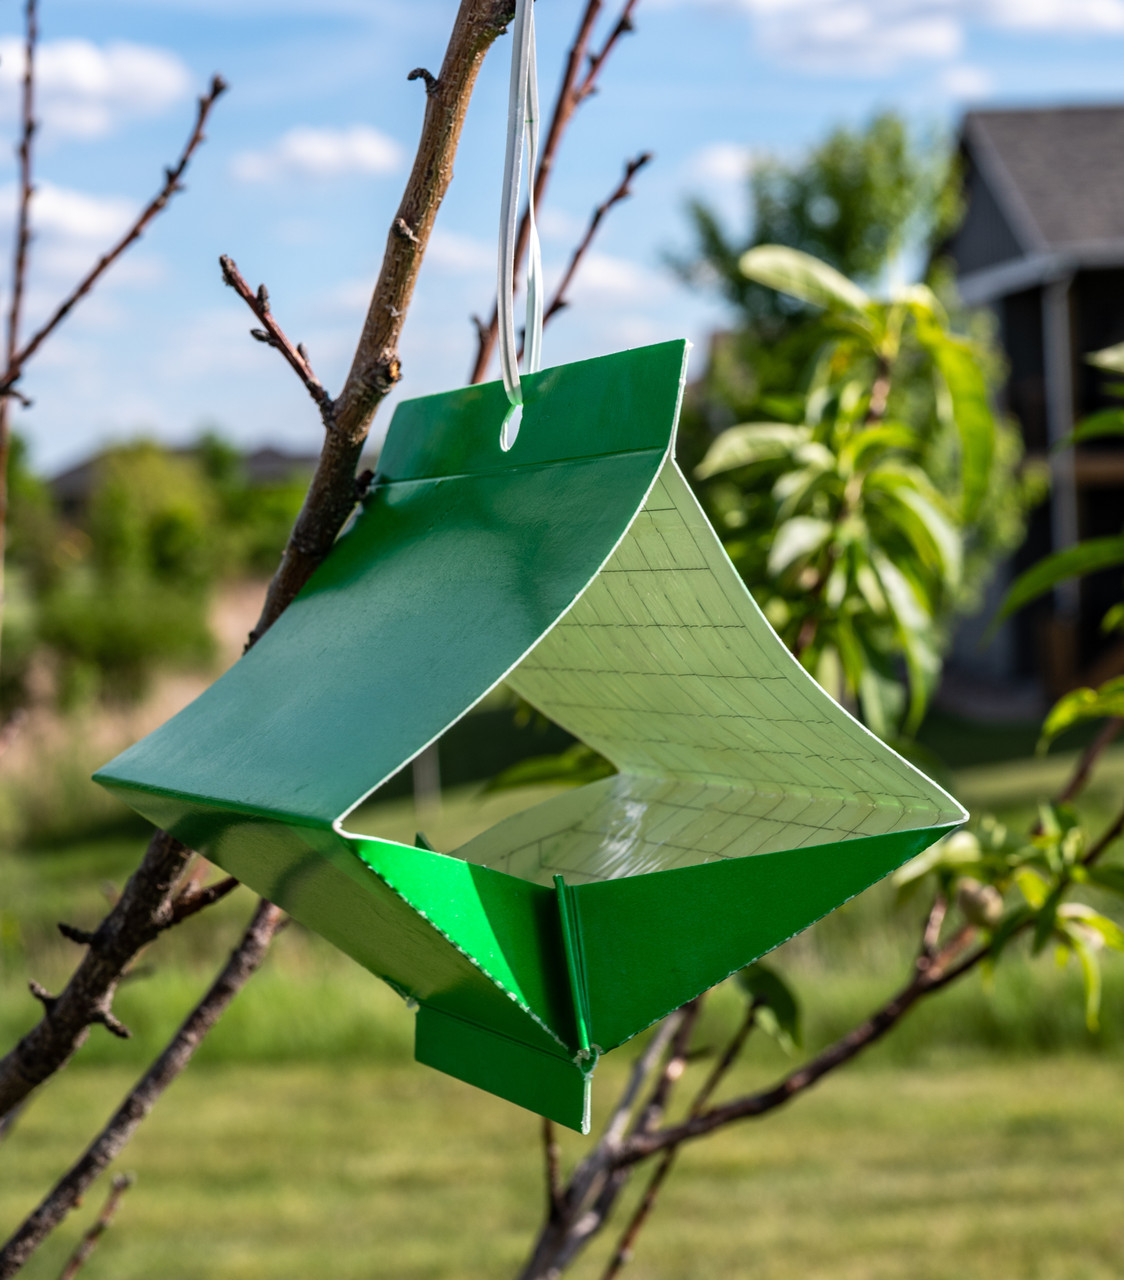 Fruit tree moth sticky trap with pheromone lure to monitor insect